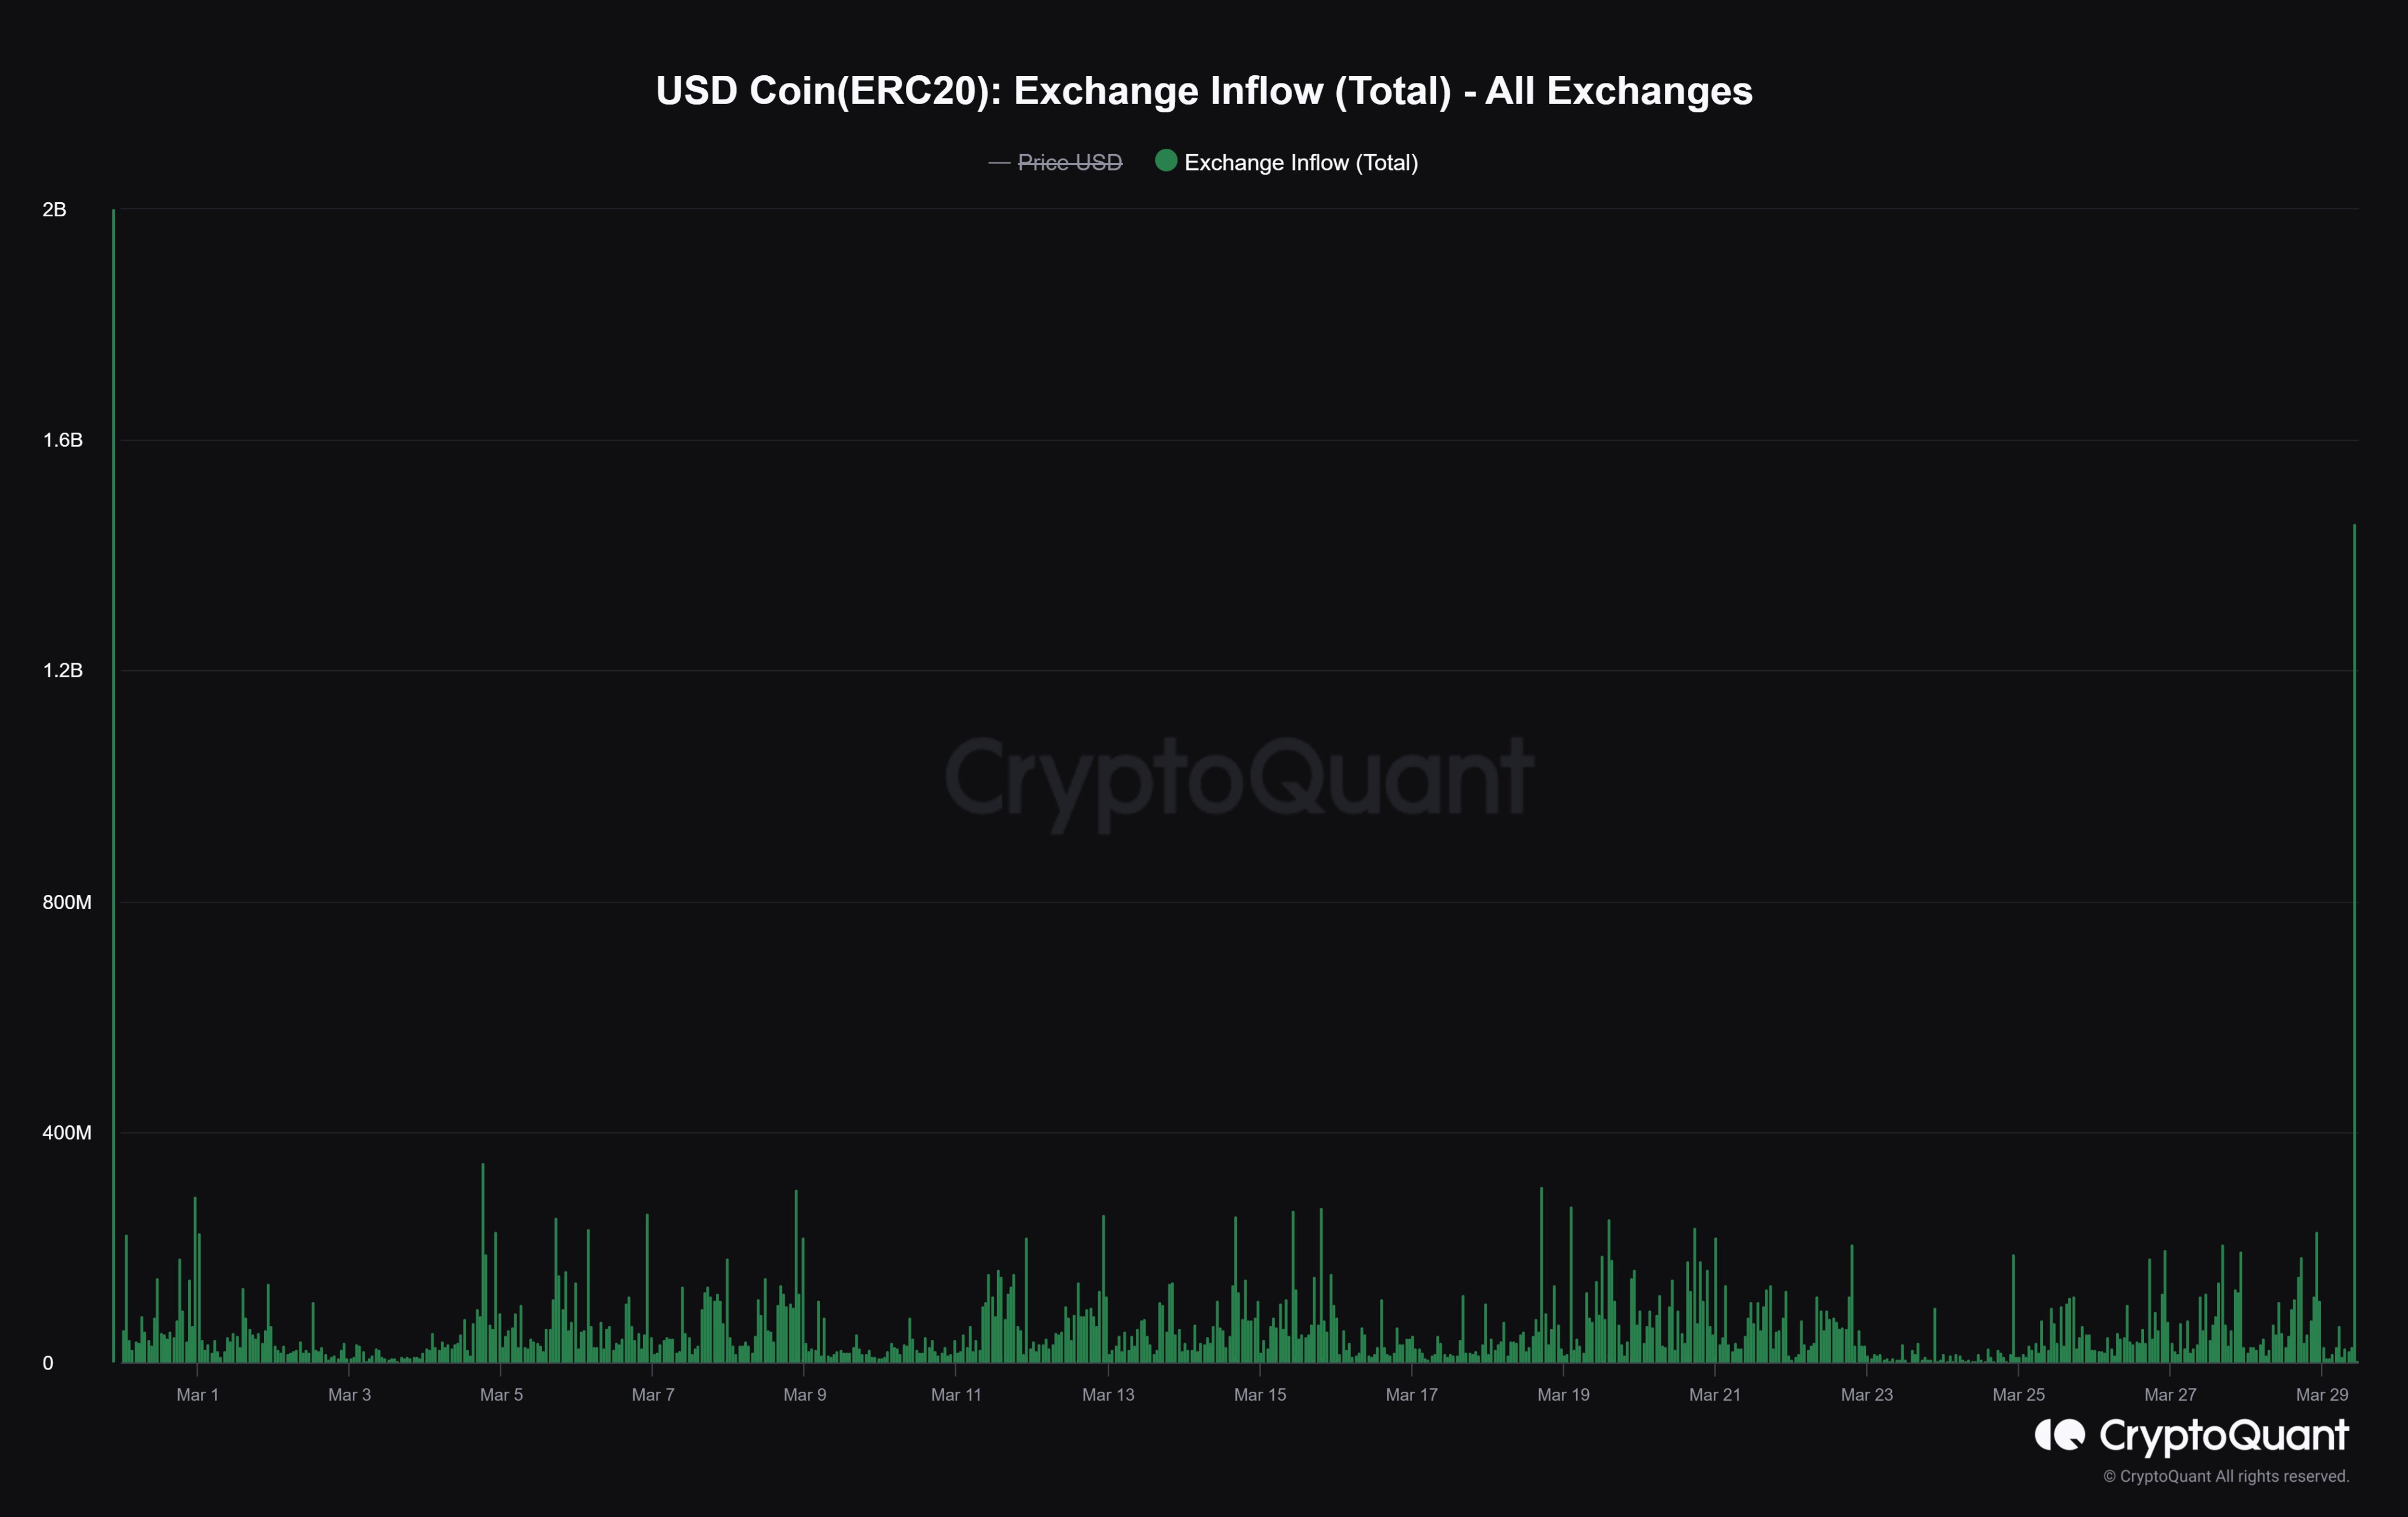 Coinbase Sees Largest USDC Inflow Ever, What This Could Mean for Bitcoin